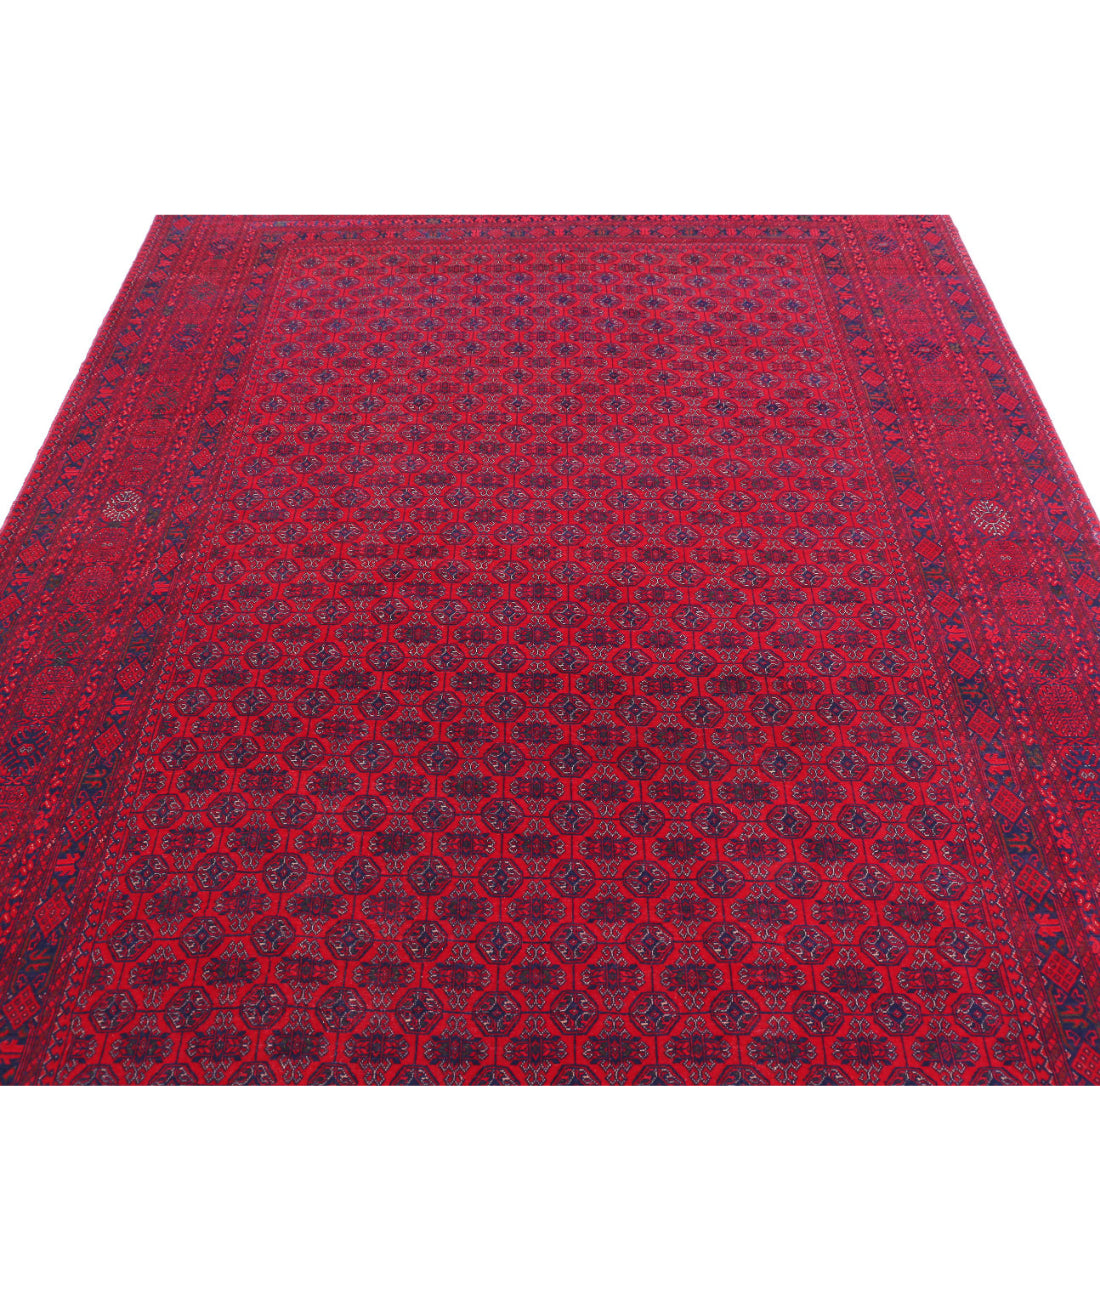 Hand Knotted Afghan Beljik Wool Rug - 6'5'' x 9'6'' 6'5'' x 9'6'' (193 X 285) / Red / Red